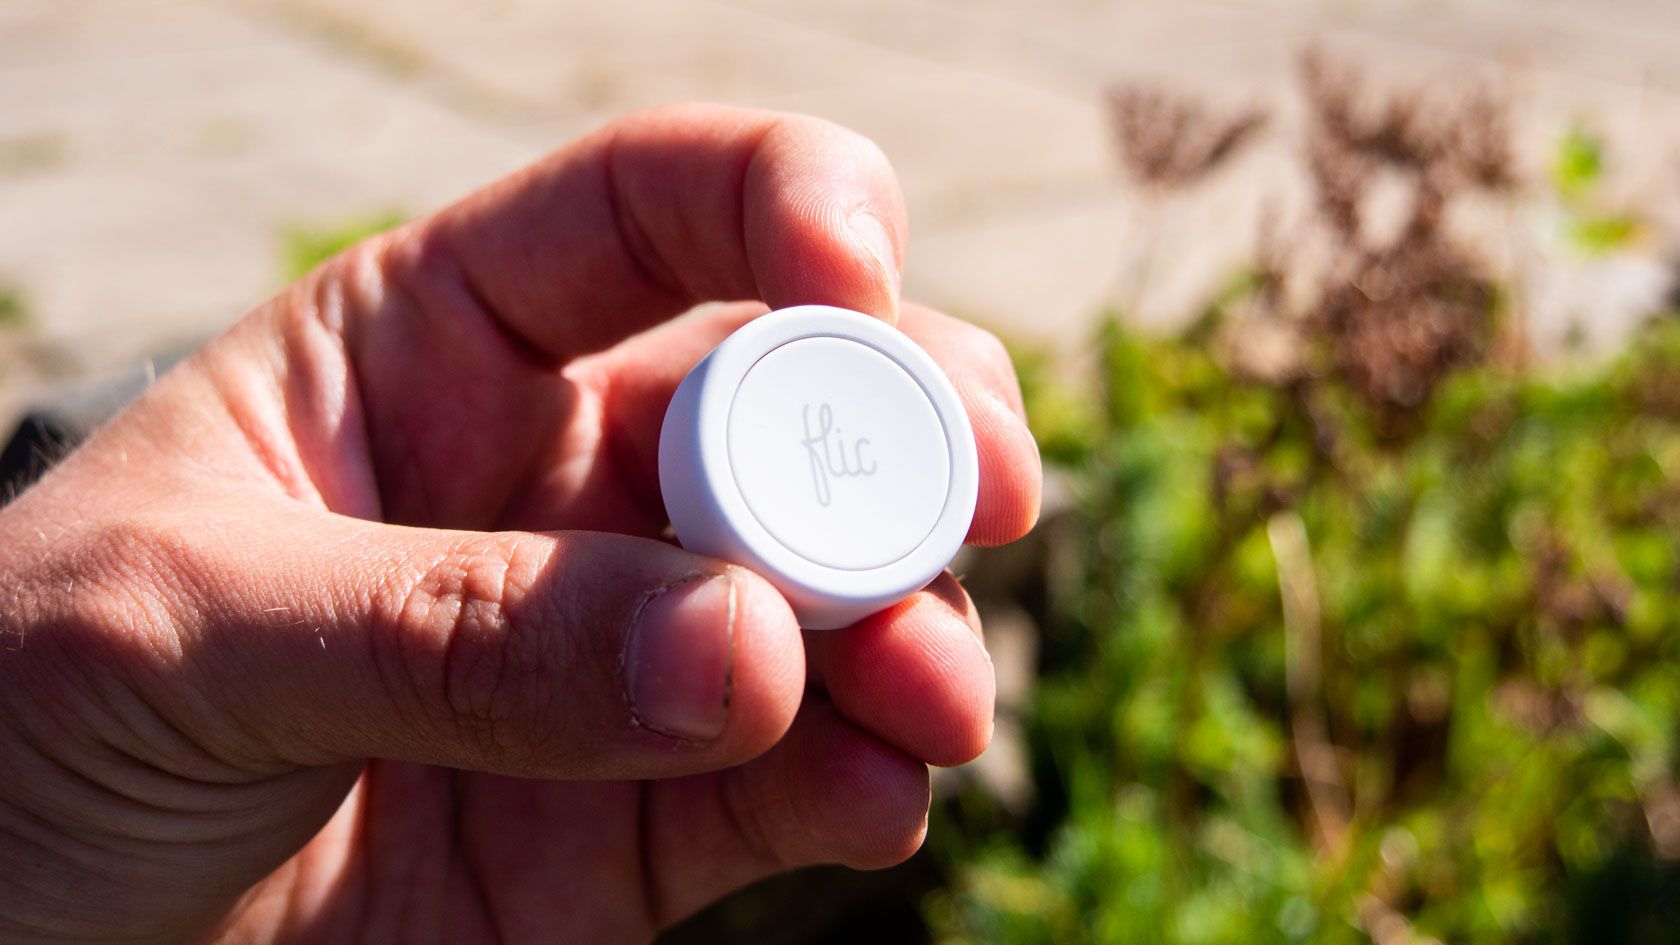 Flic 2 Review: The Ultimate Smart Button That Integrates Anything